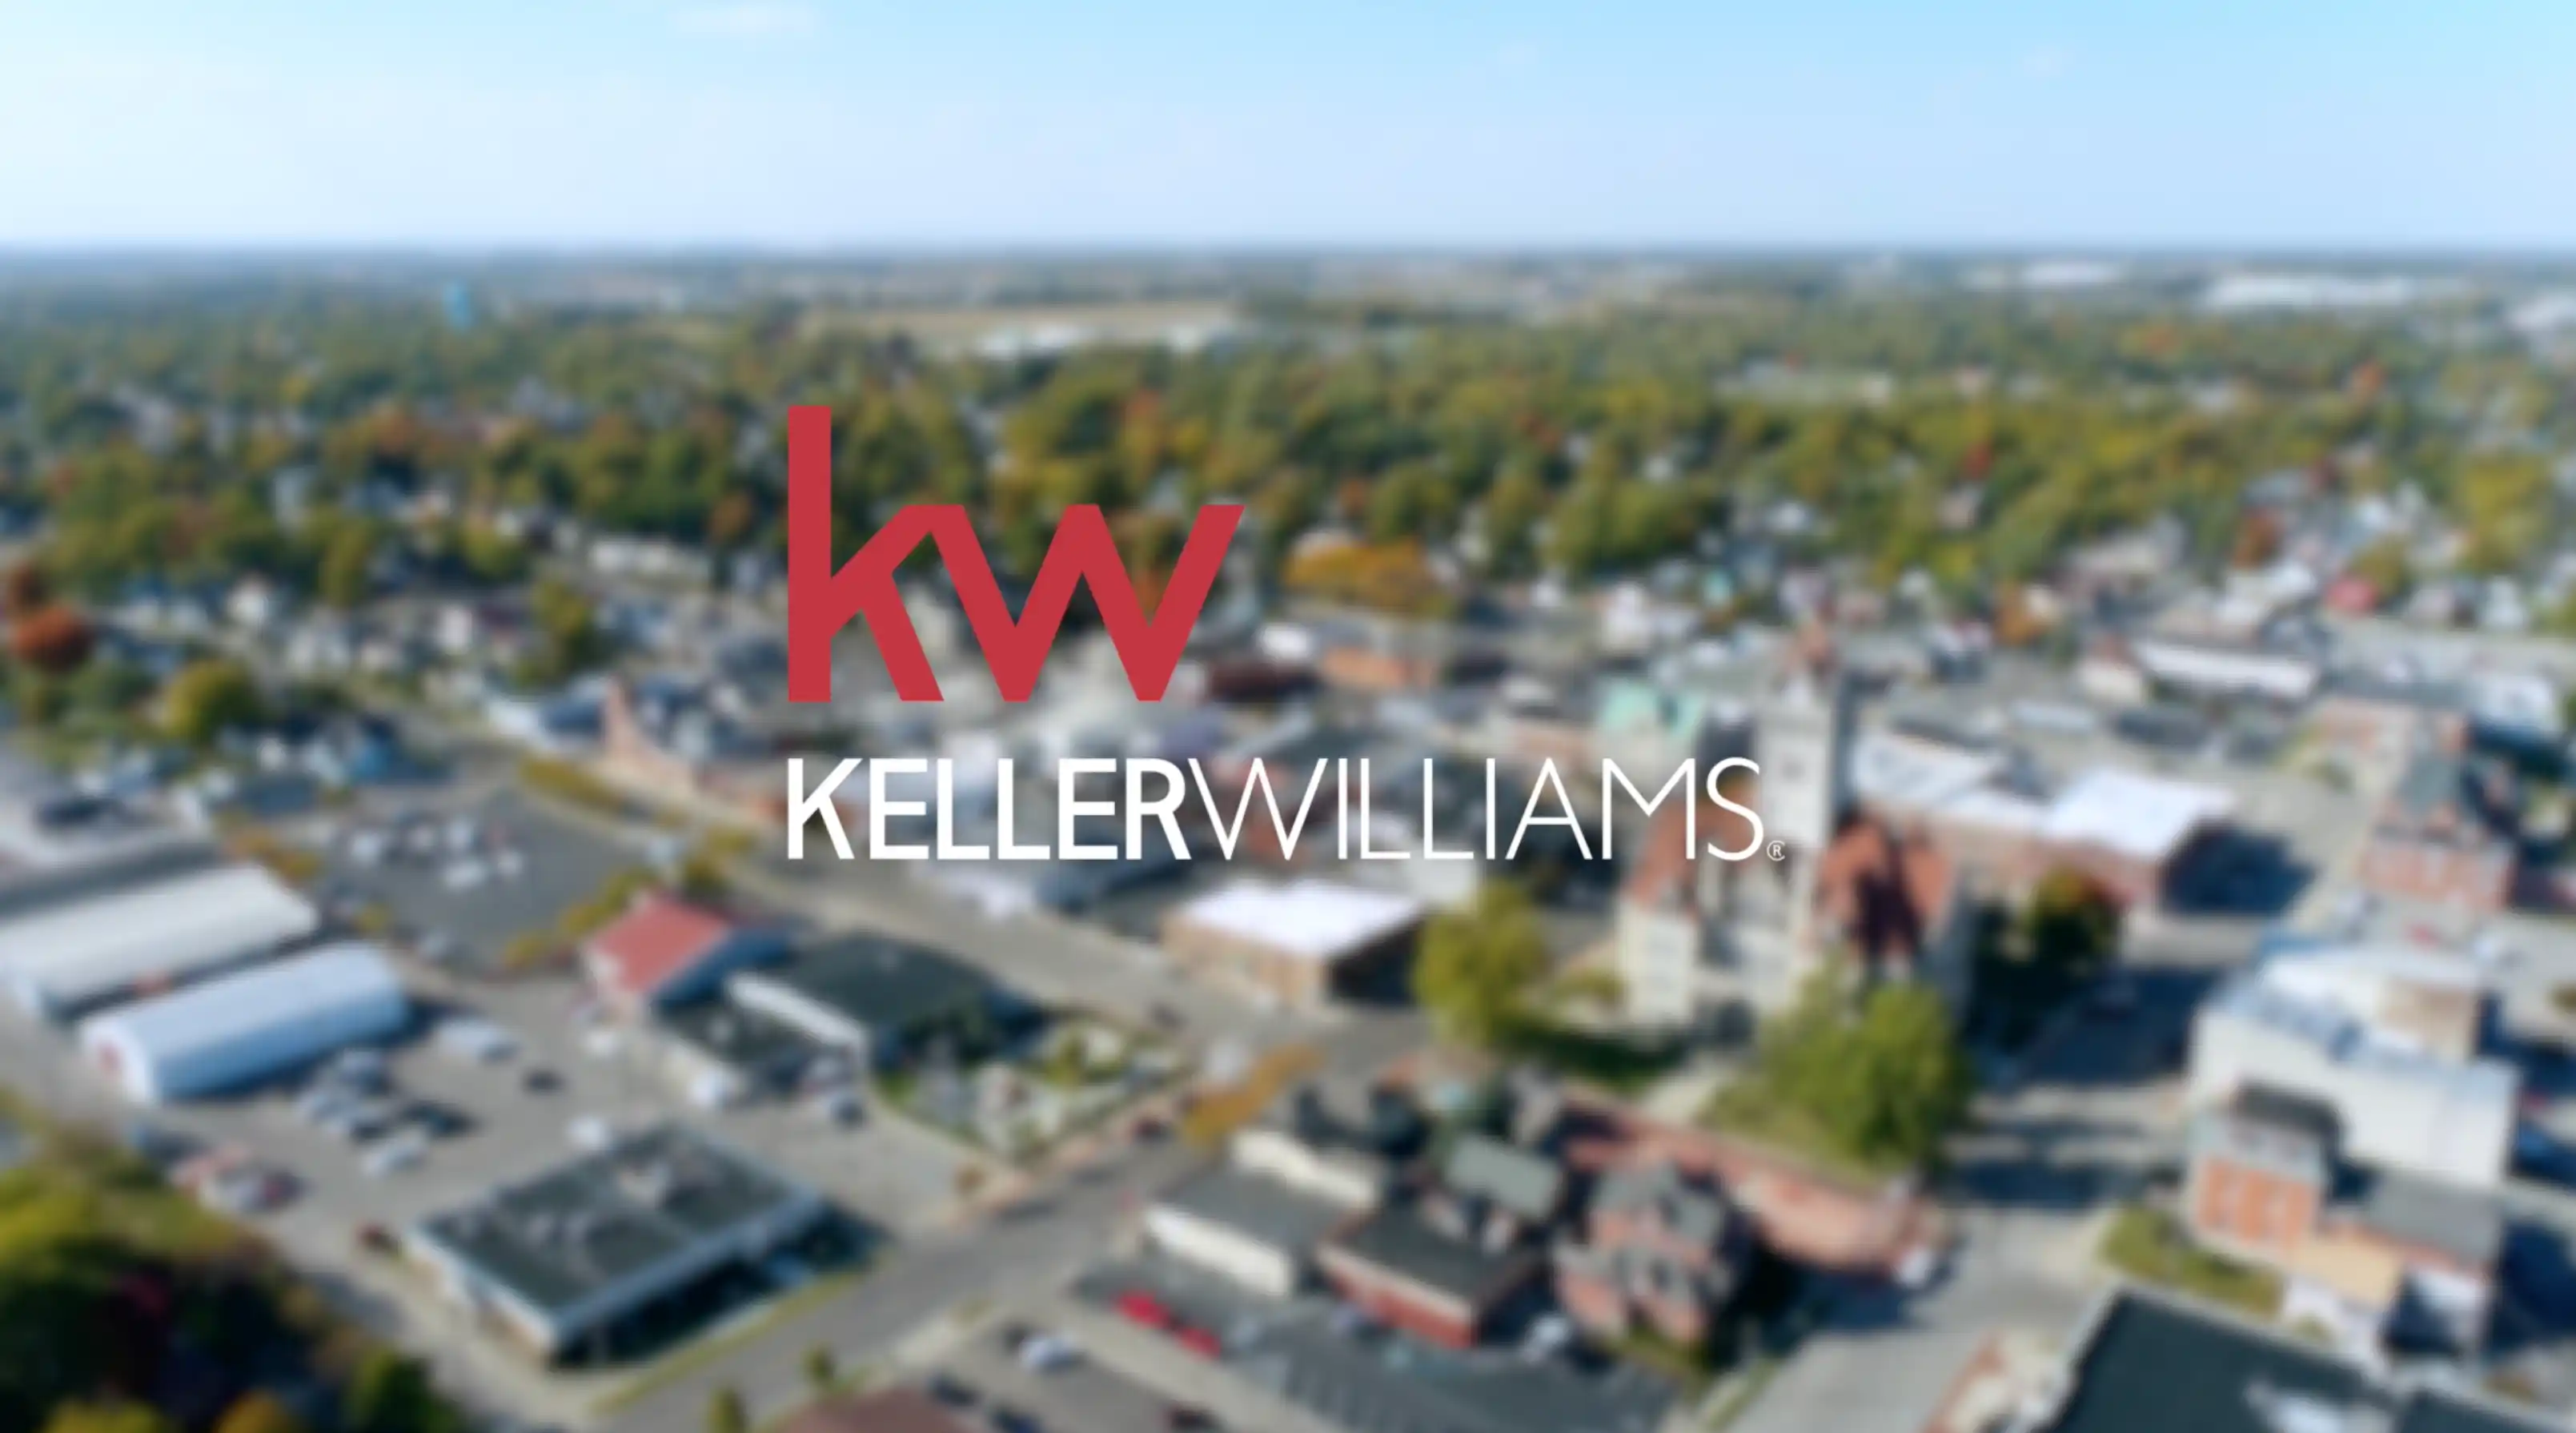 Aerial view of a suburban landscape with buildings and trees, overlaid with the Keller Williams real estate company logo in focus.